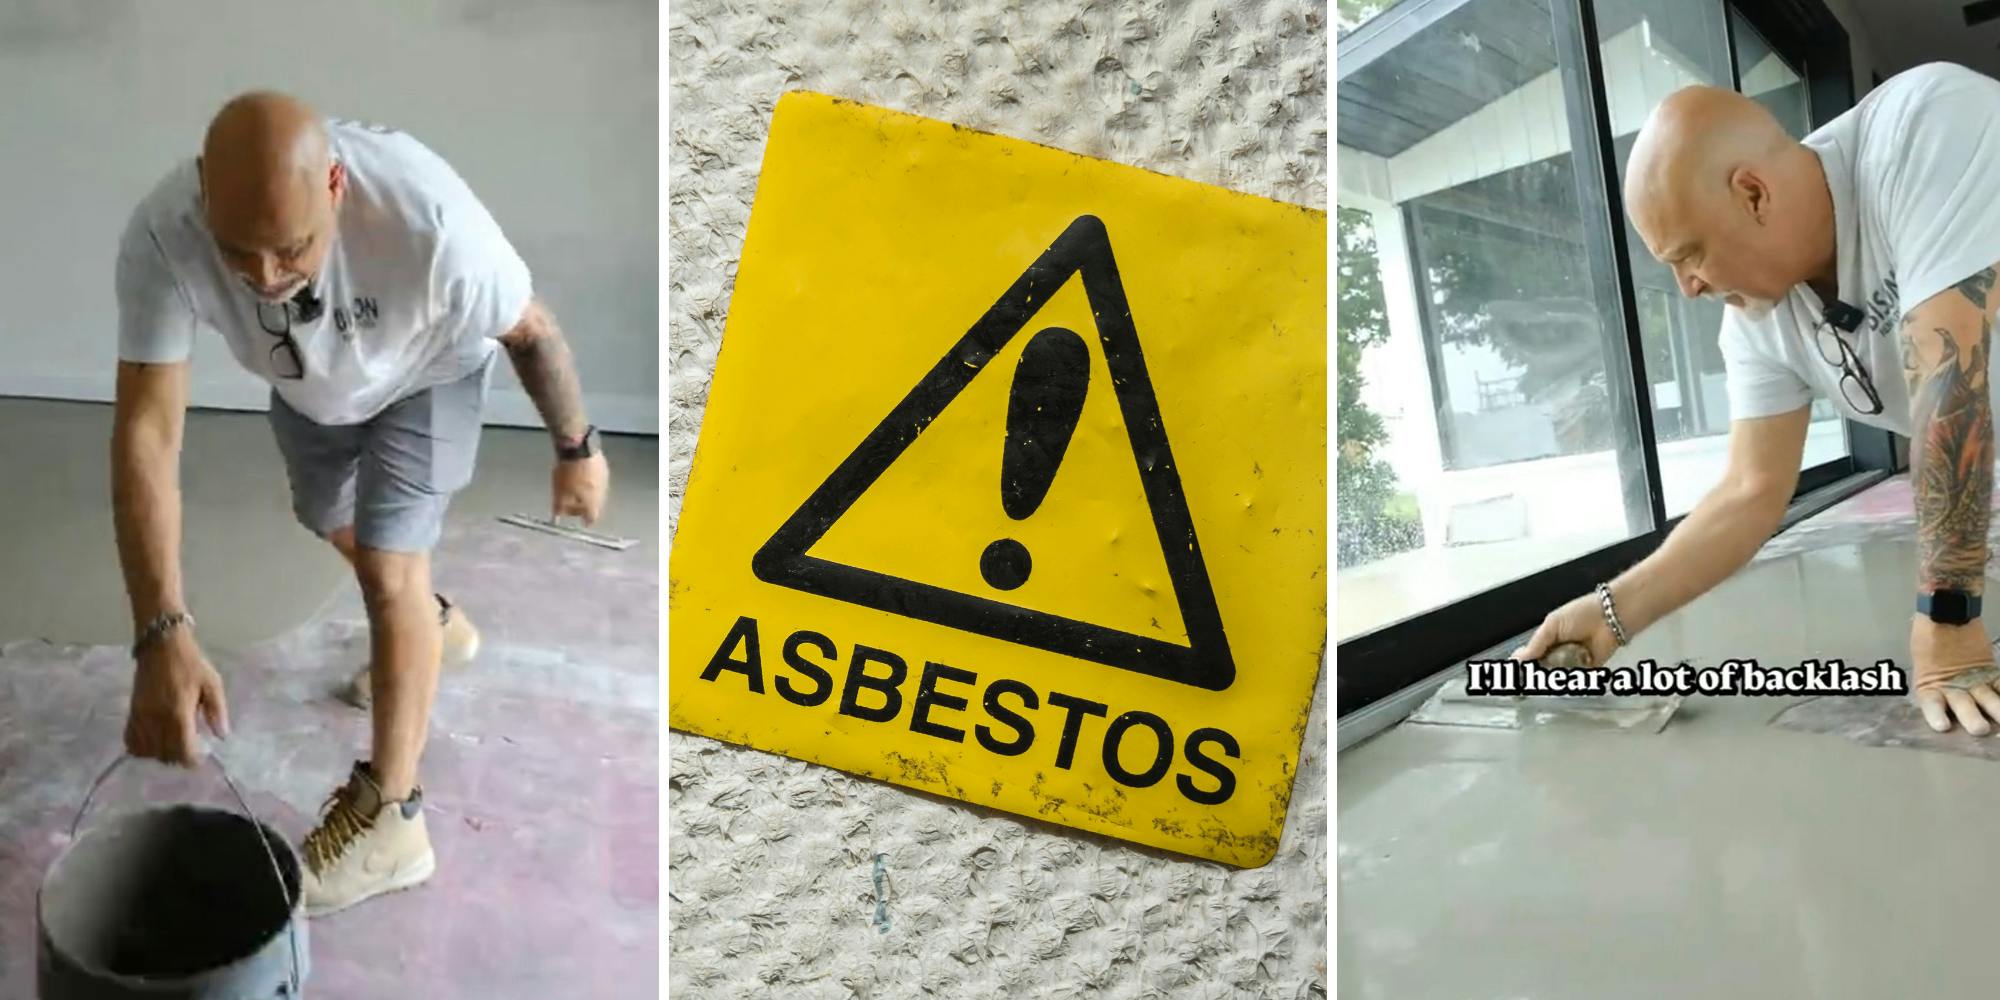 Repairman says try this trick when removing toxic asbestos from your home